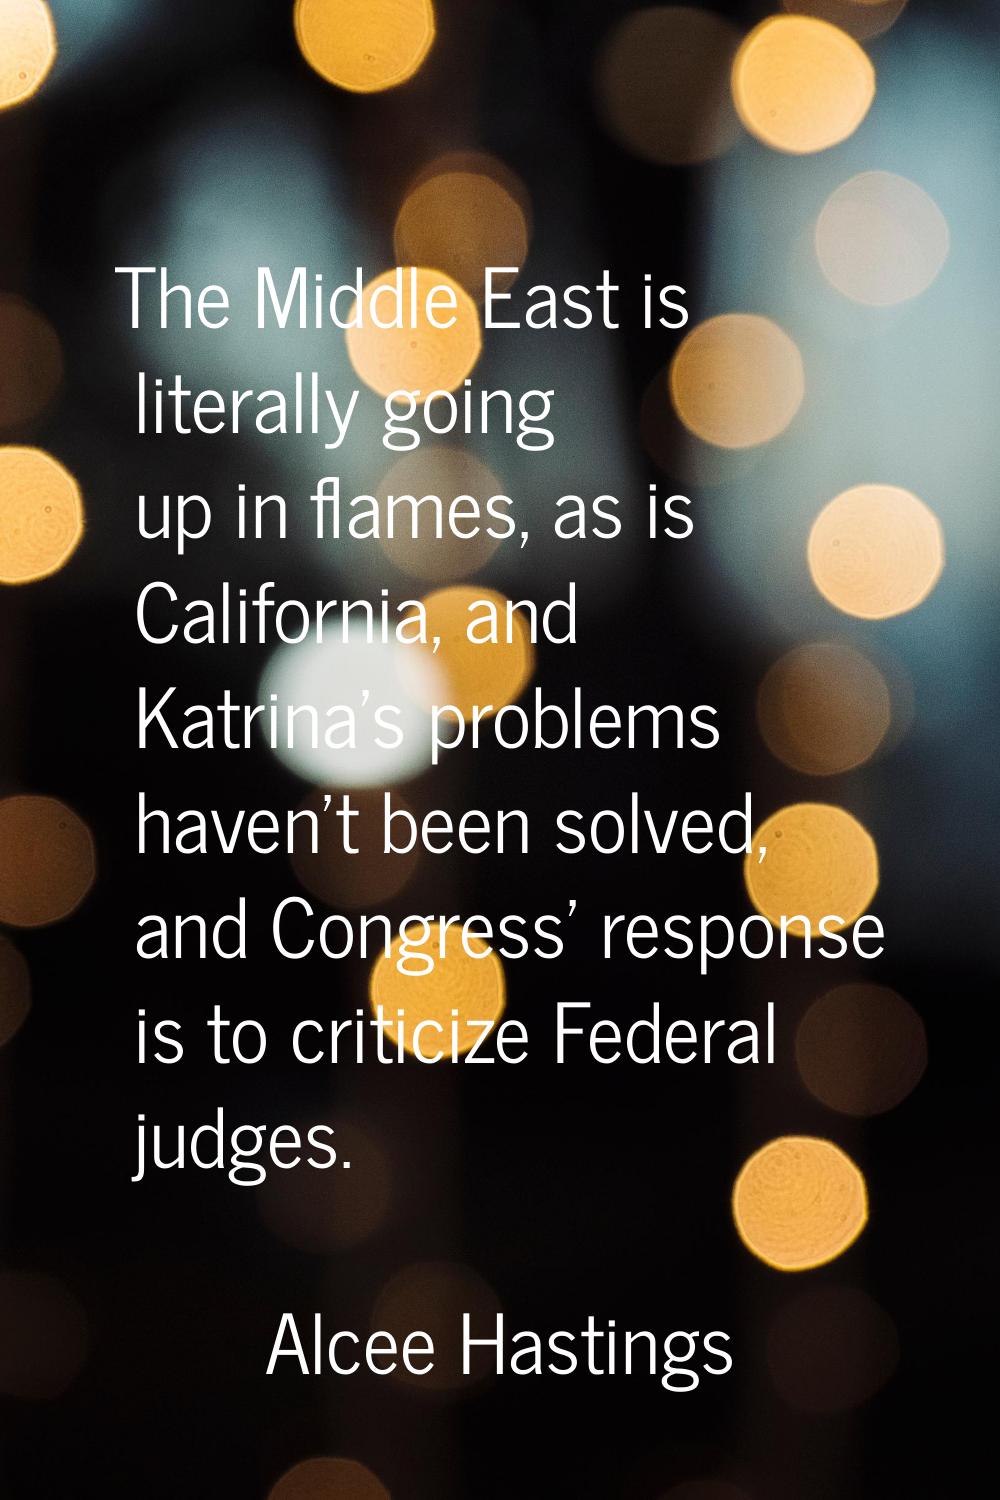 The Middle East is literally going up in flames, as is California, and Katrina's problems haven't b